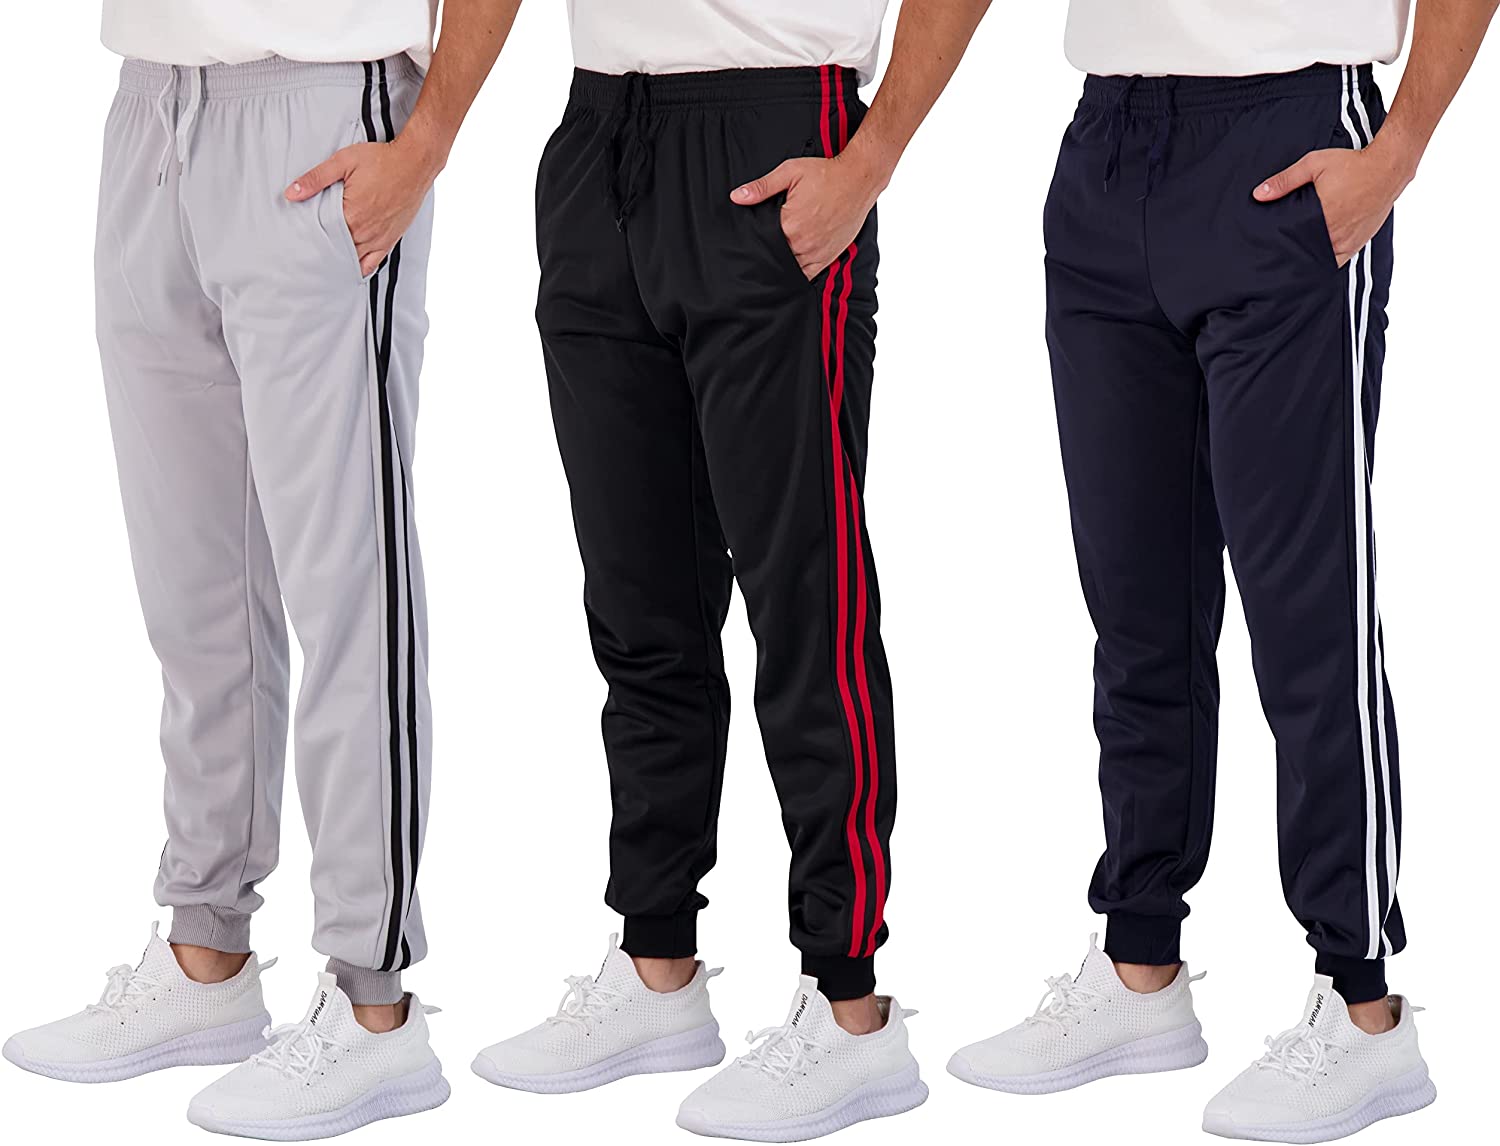 The Several Styles of Essential Sweatpants